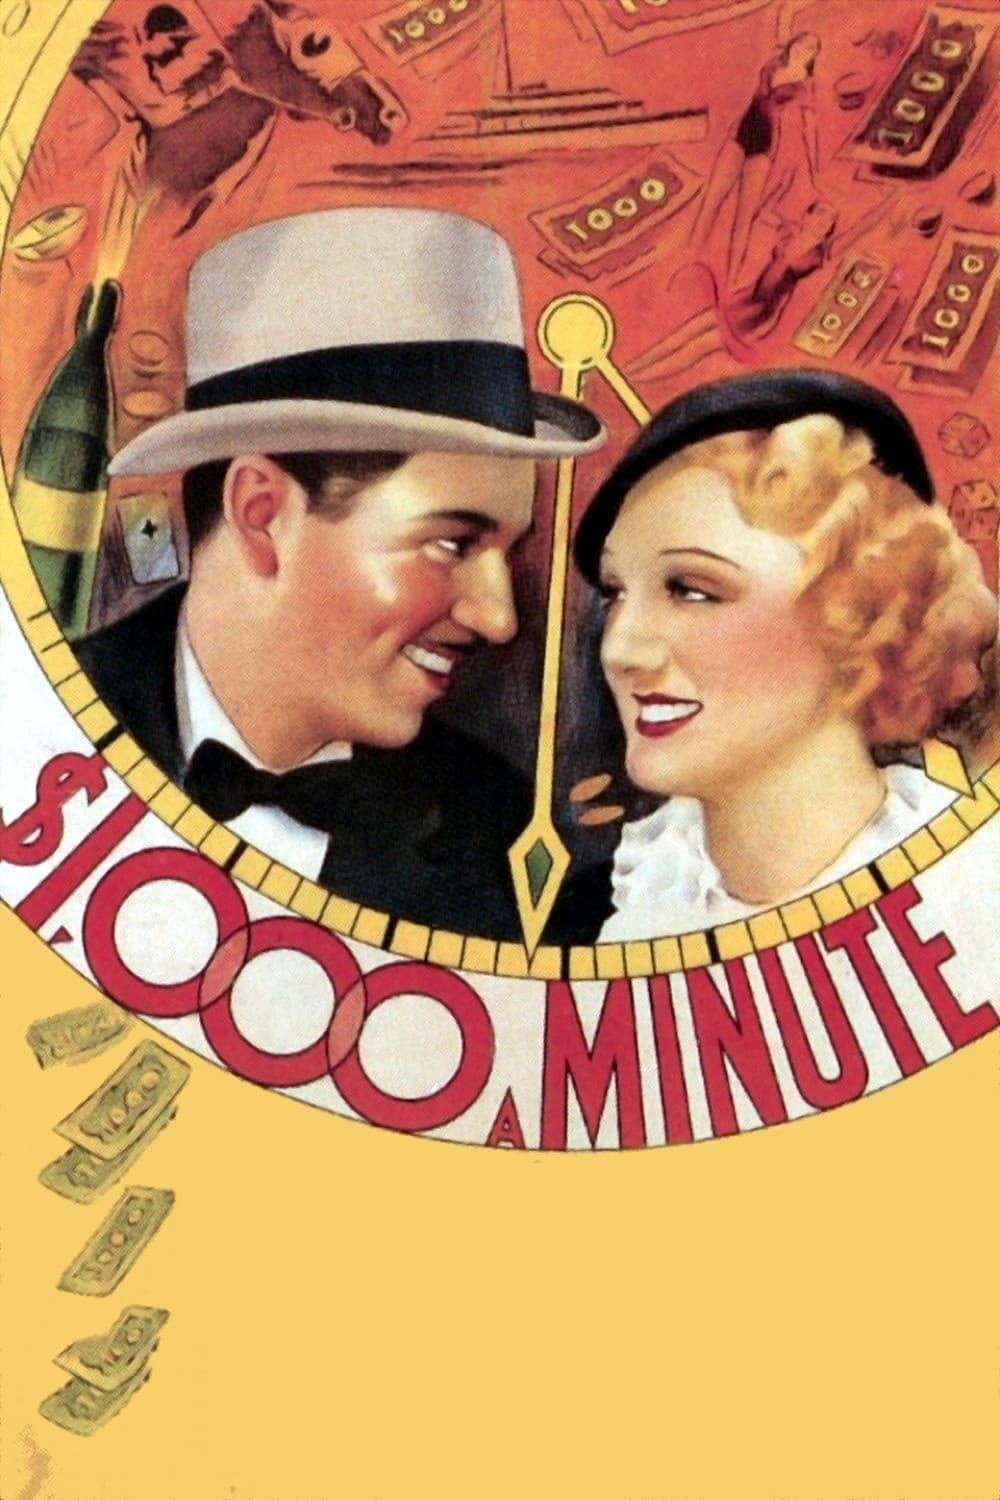 $1000 a Minute (1935)